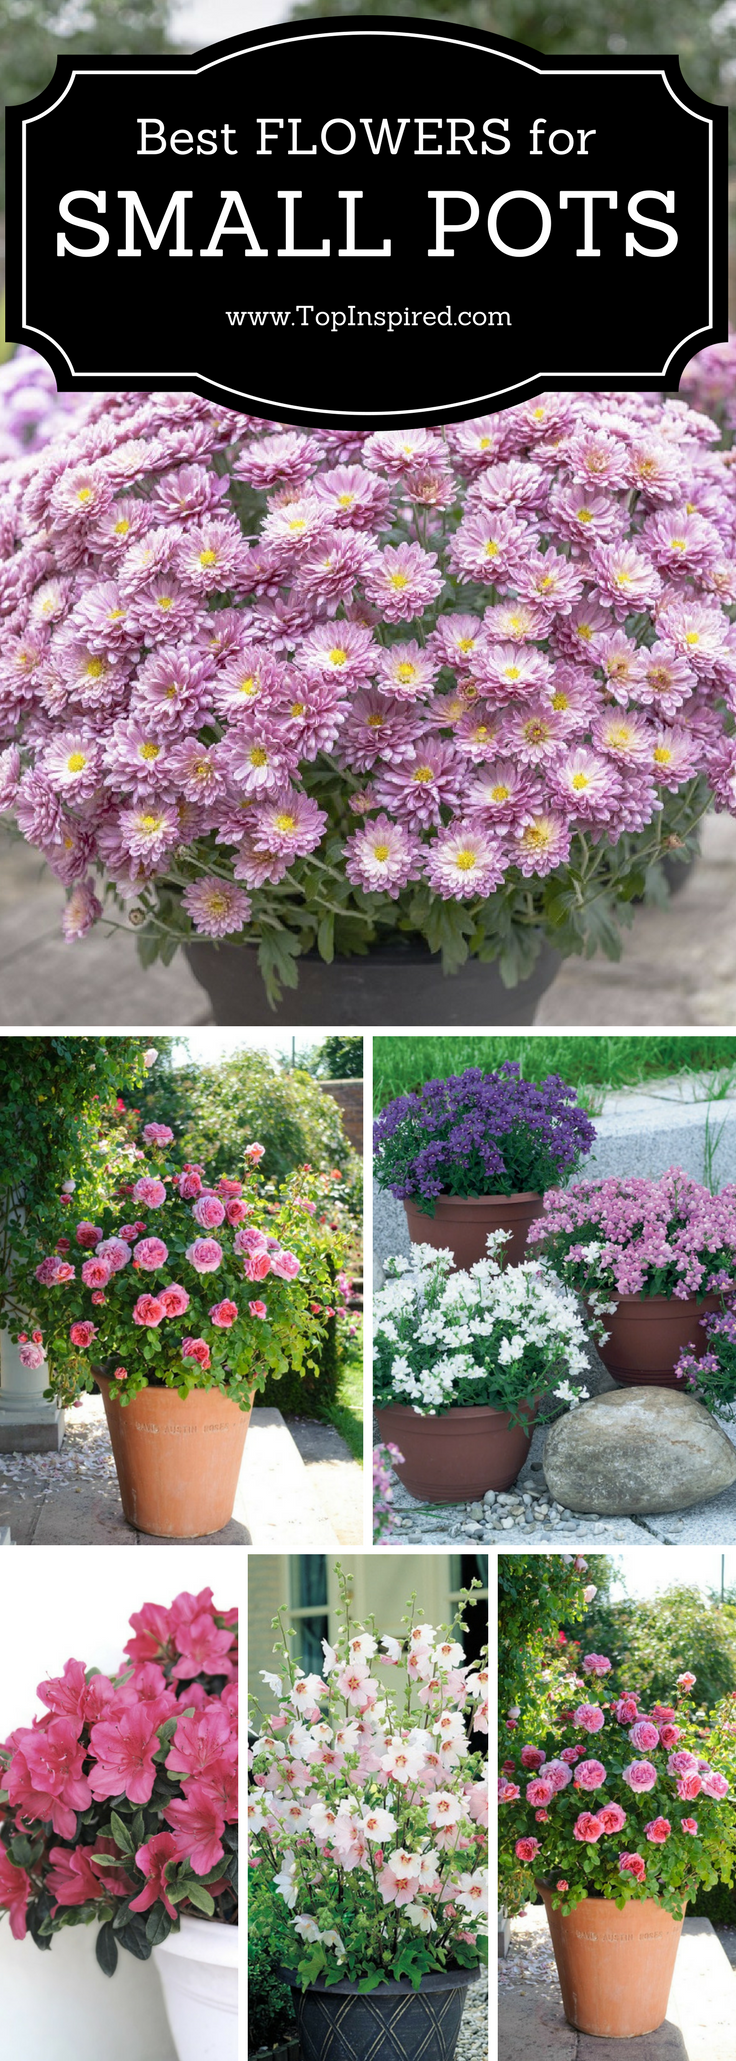 Balkongarten Genial top 10 Wonderful Plants for Small Containers